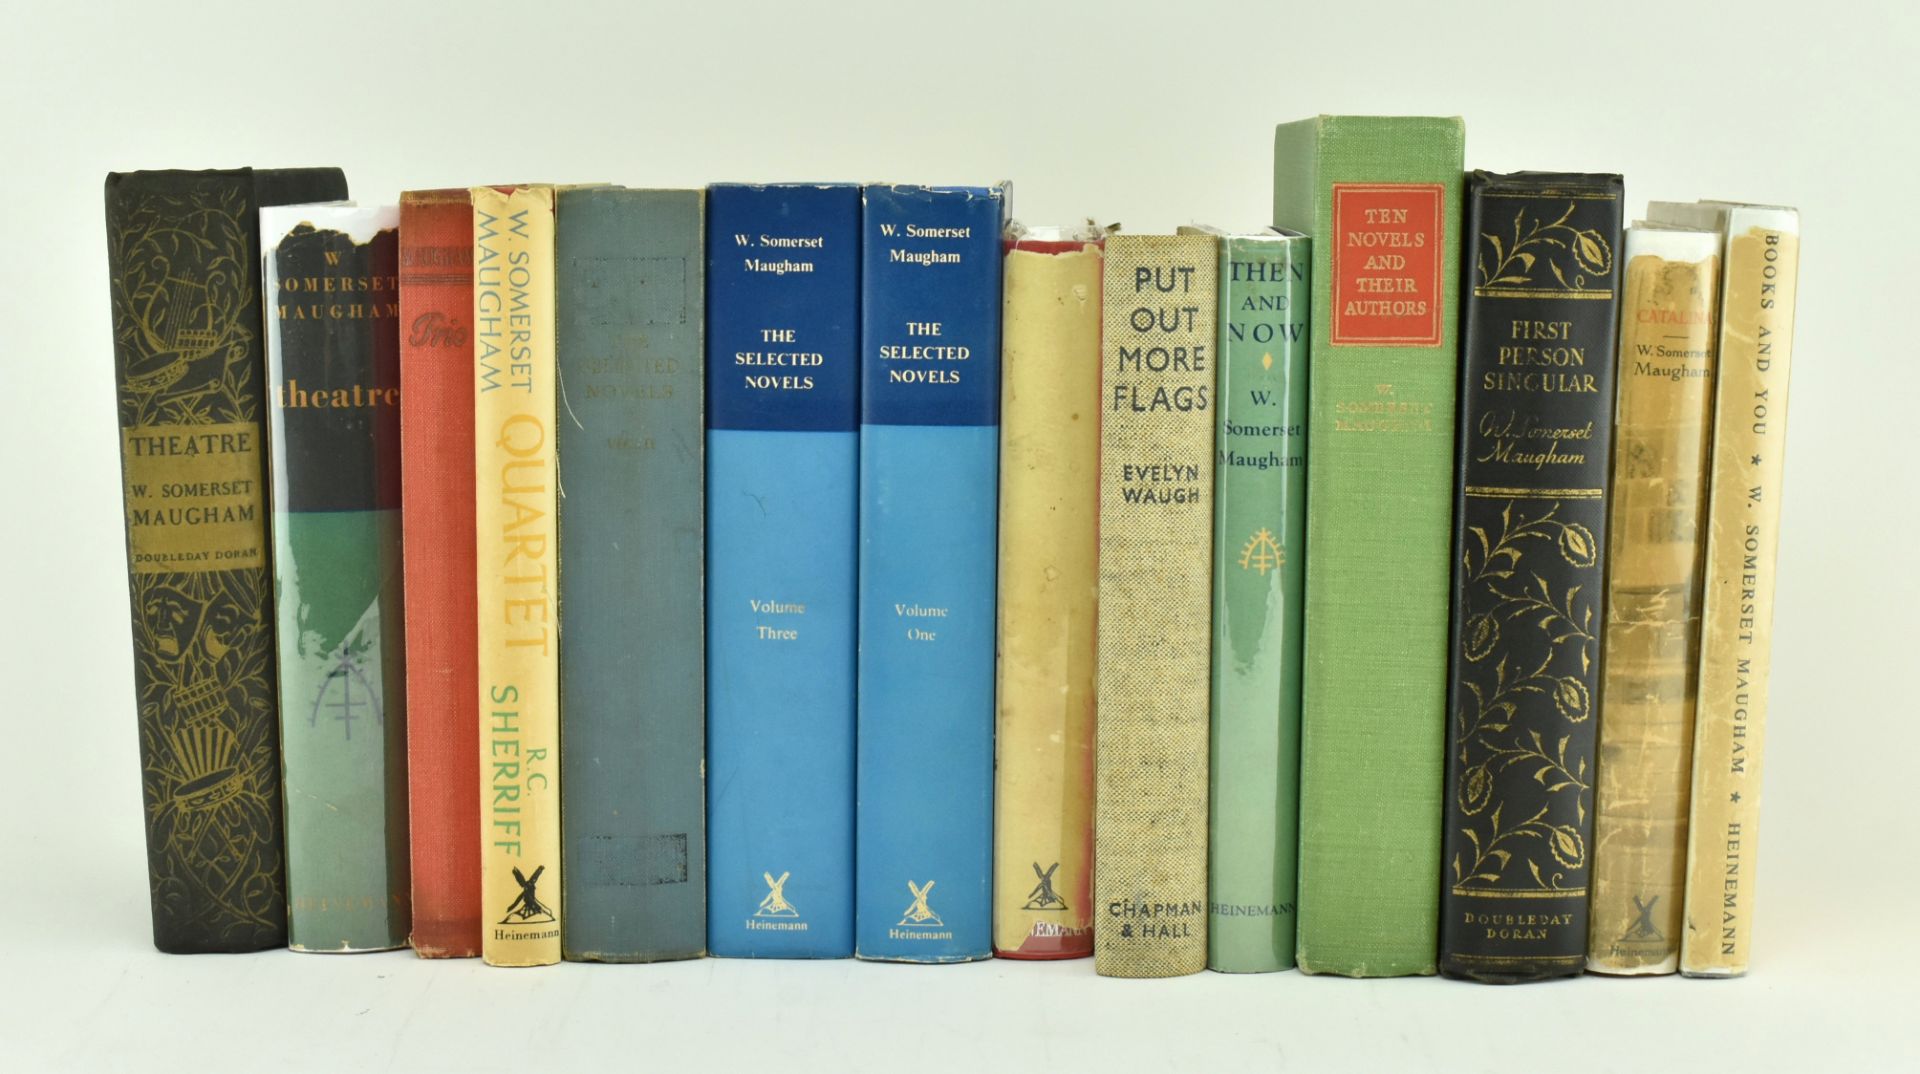 MAUGHAM, WILLIAM SOMERSET. COLLECTION OF 14 FIRST EDITIONS